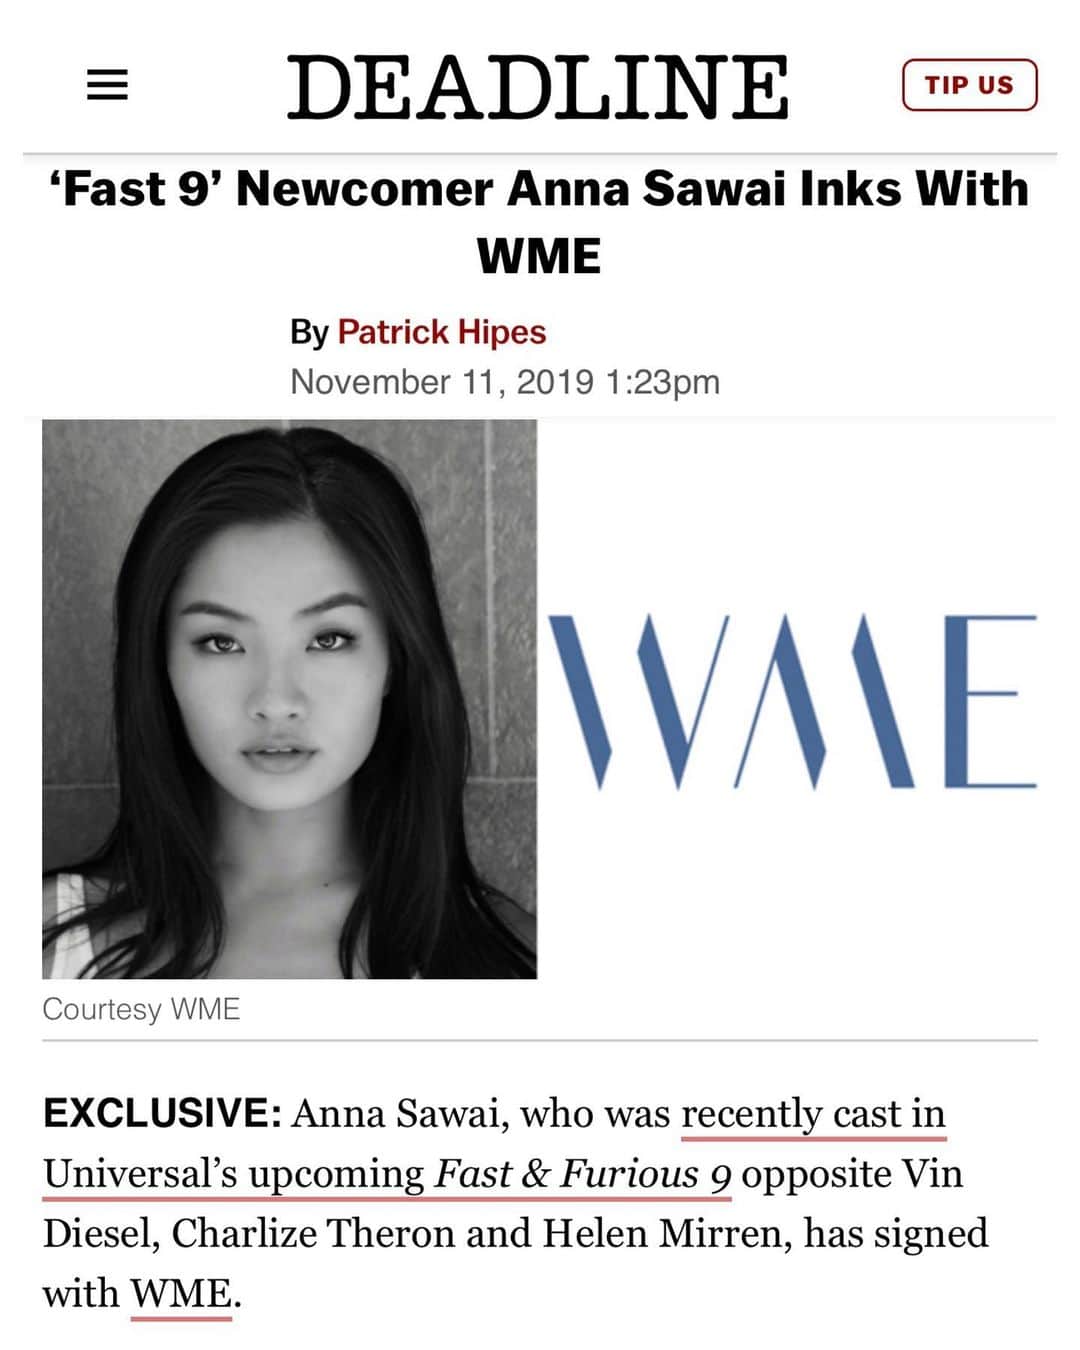 Anna のインスタグラム：「It’s official!! Very excited to be joining forces with the brilliant team at WME😎🤜🤛 アメリカのエージェントが決まったのでこれからアクセル全開で進んでいきます🔥」